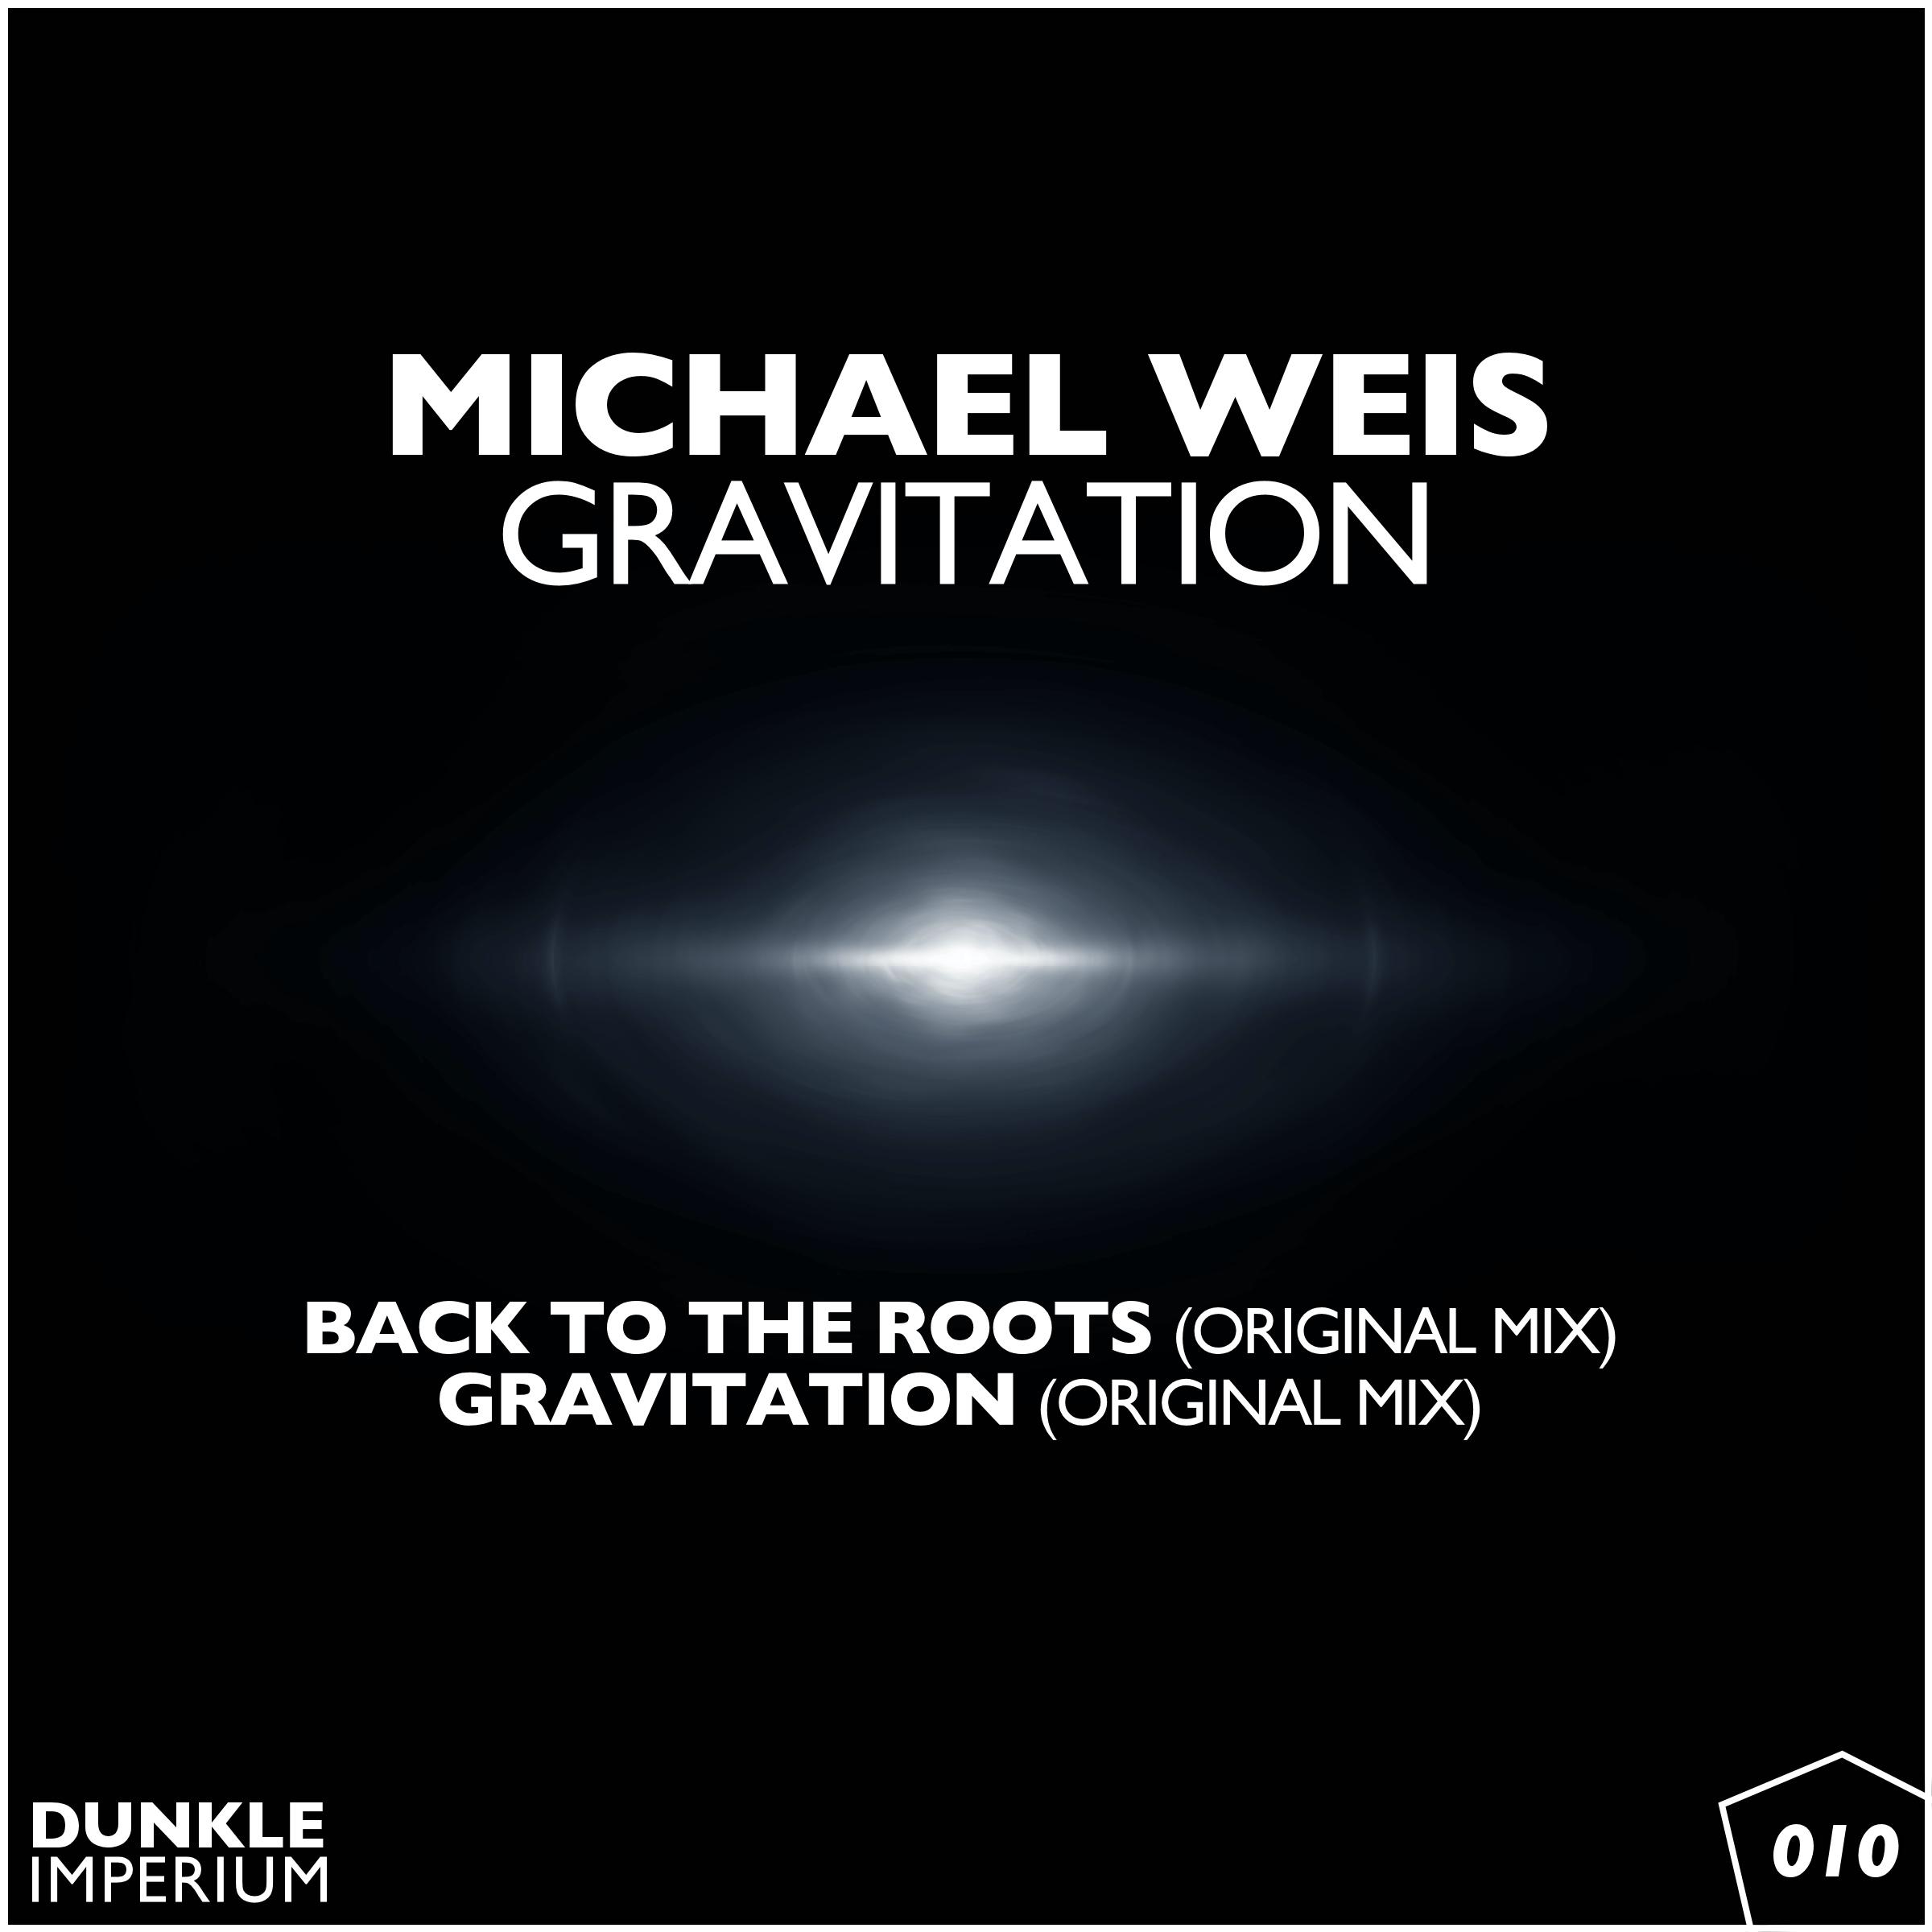 Michael Weis - Back to the Roots